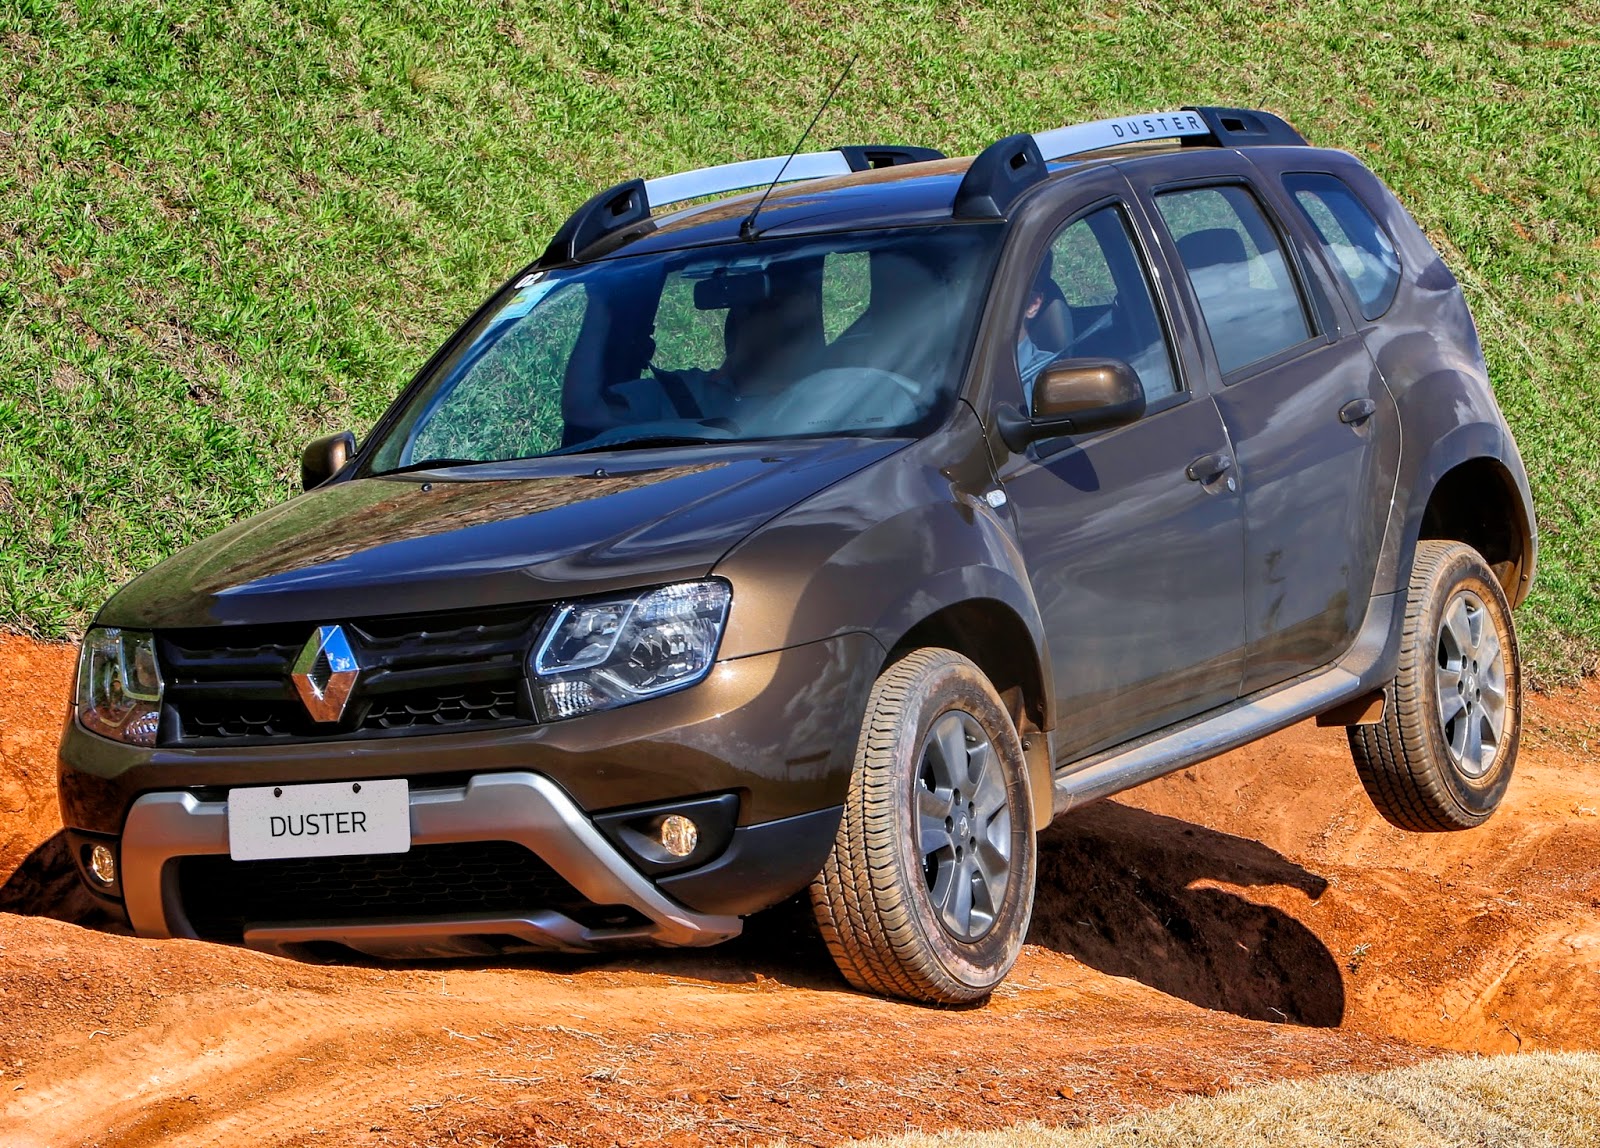 Дастер 4wd 2.0. Renault Duster 2016. Renault Duster 2017. Ренаулт Дастер. Duster Renault Duster.